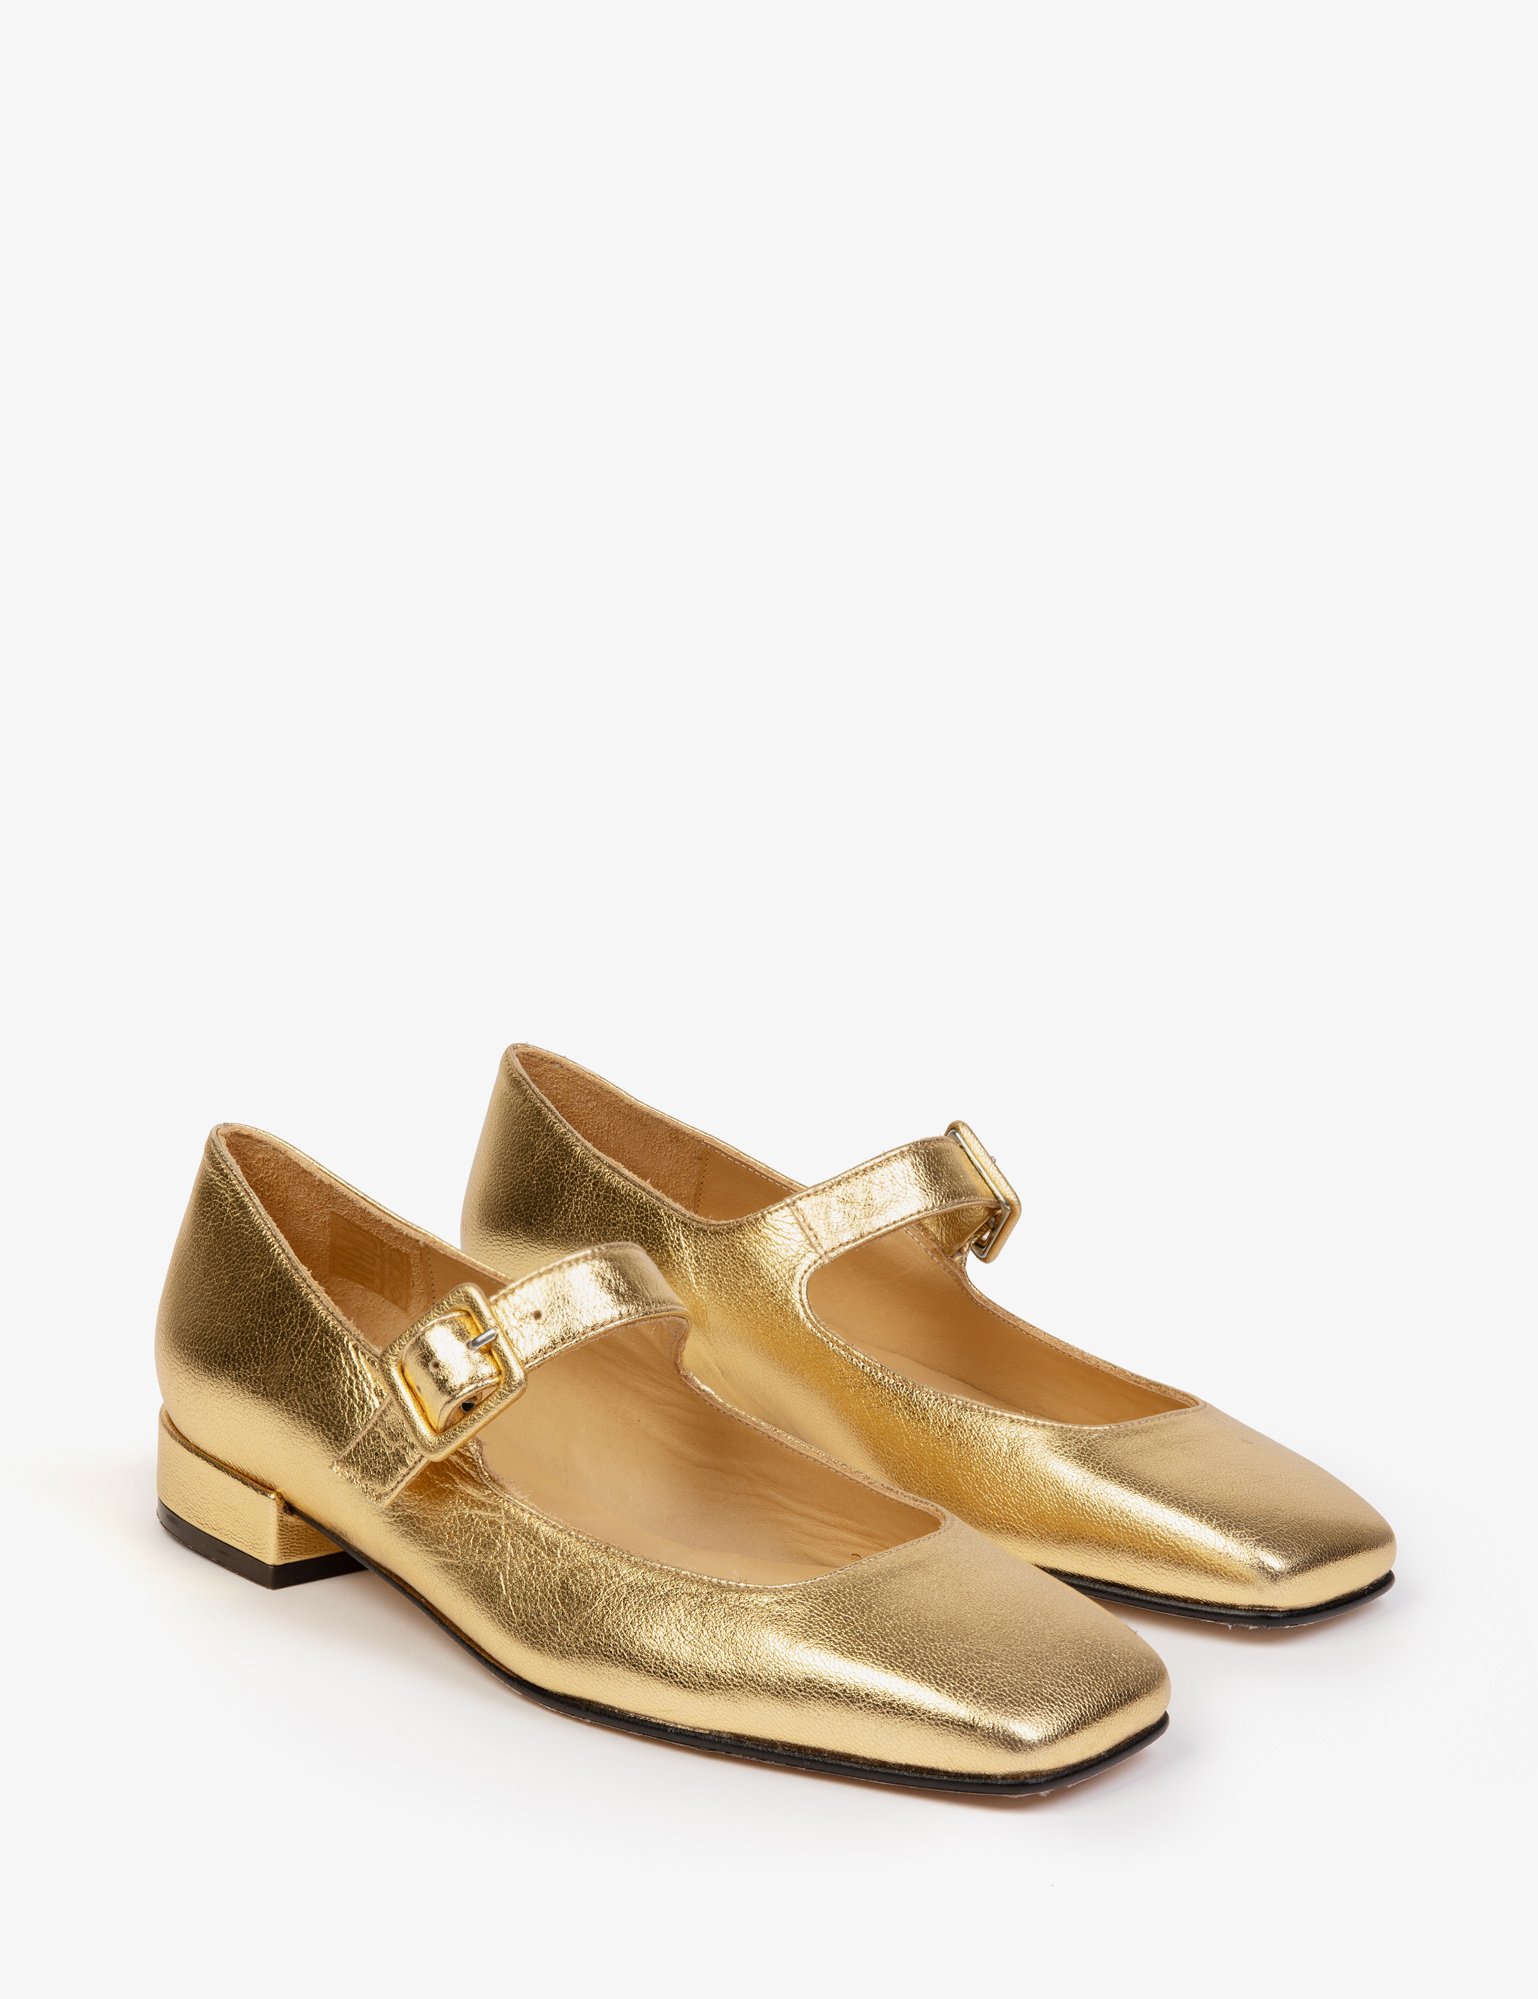 Low Mary Jane Leather Shoe - Gold |Womens Shoes| Penelope Chilvers